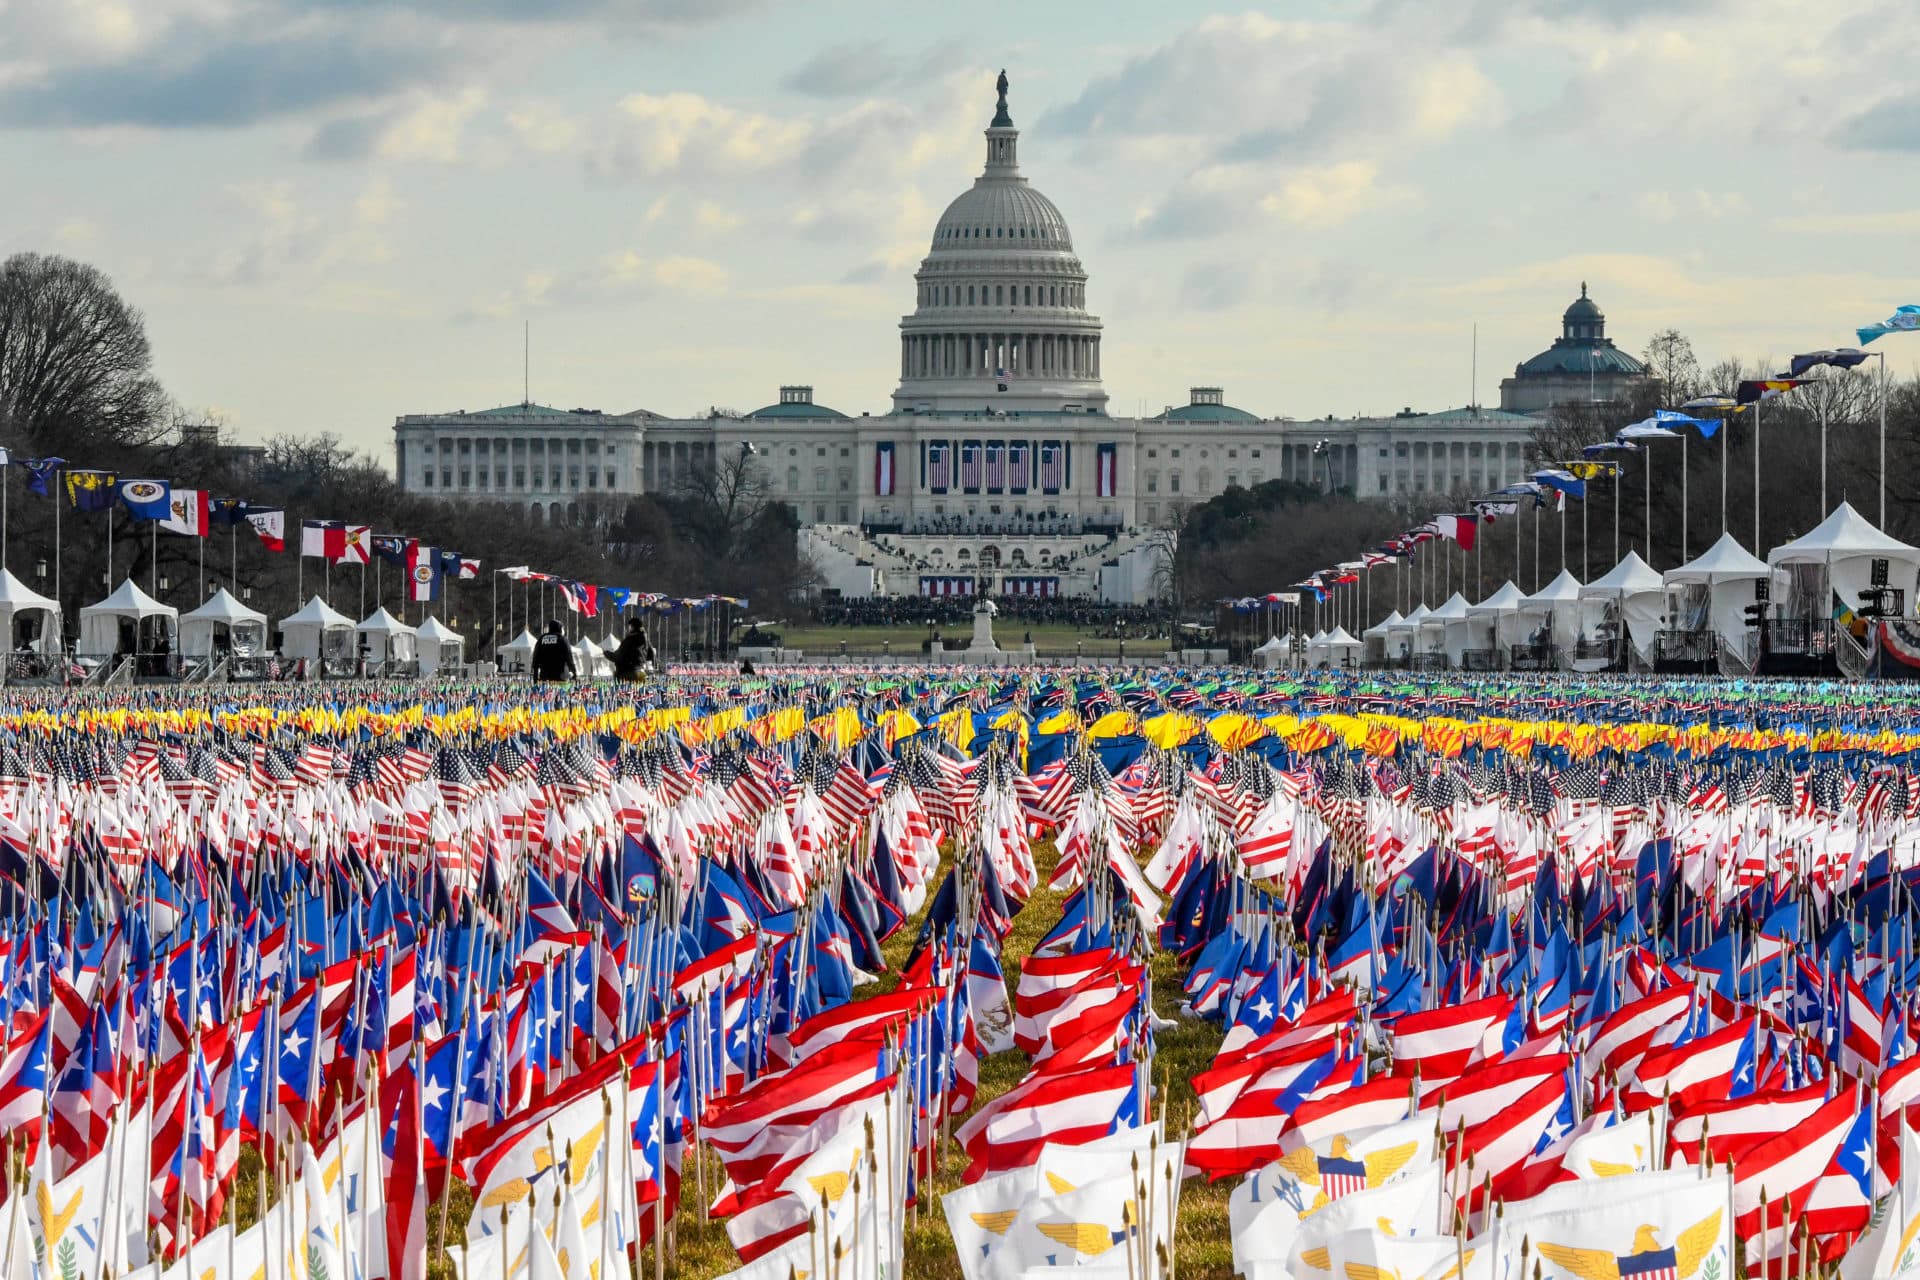 Flags line the National Mall in front of the U.S. Capitol in place of members of the public who could not attend because of the pandemic. (Stephanie Keith/Getty Images)